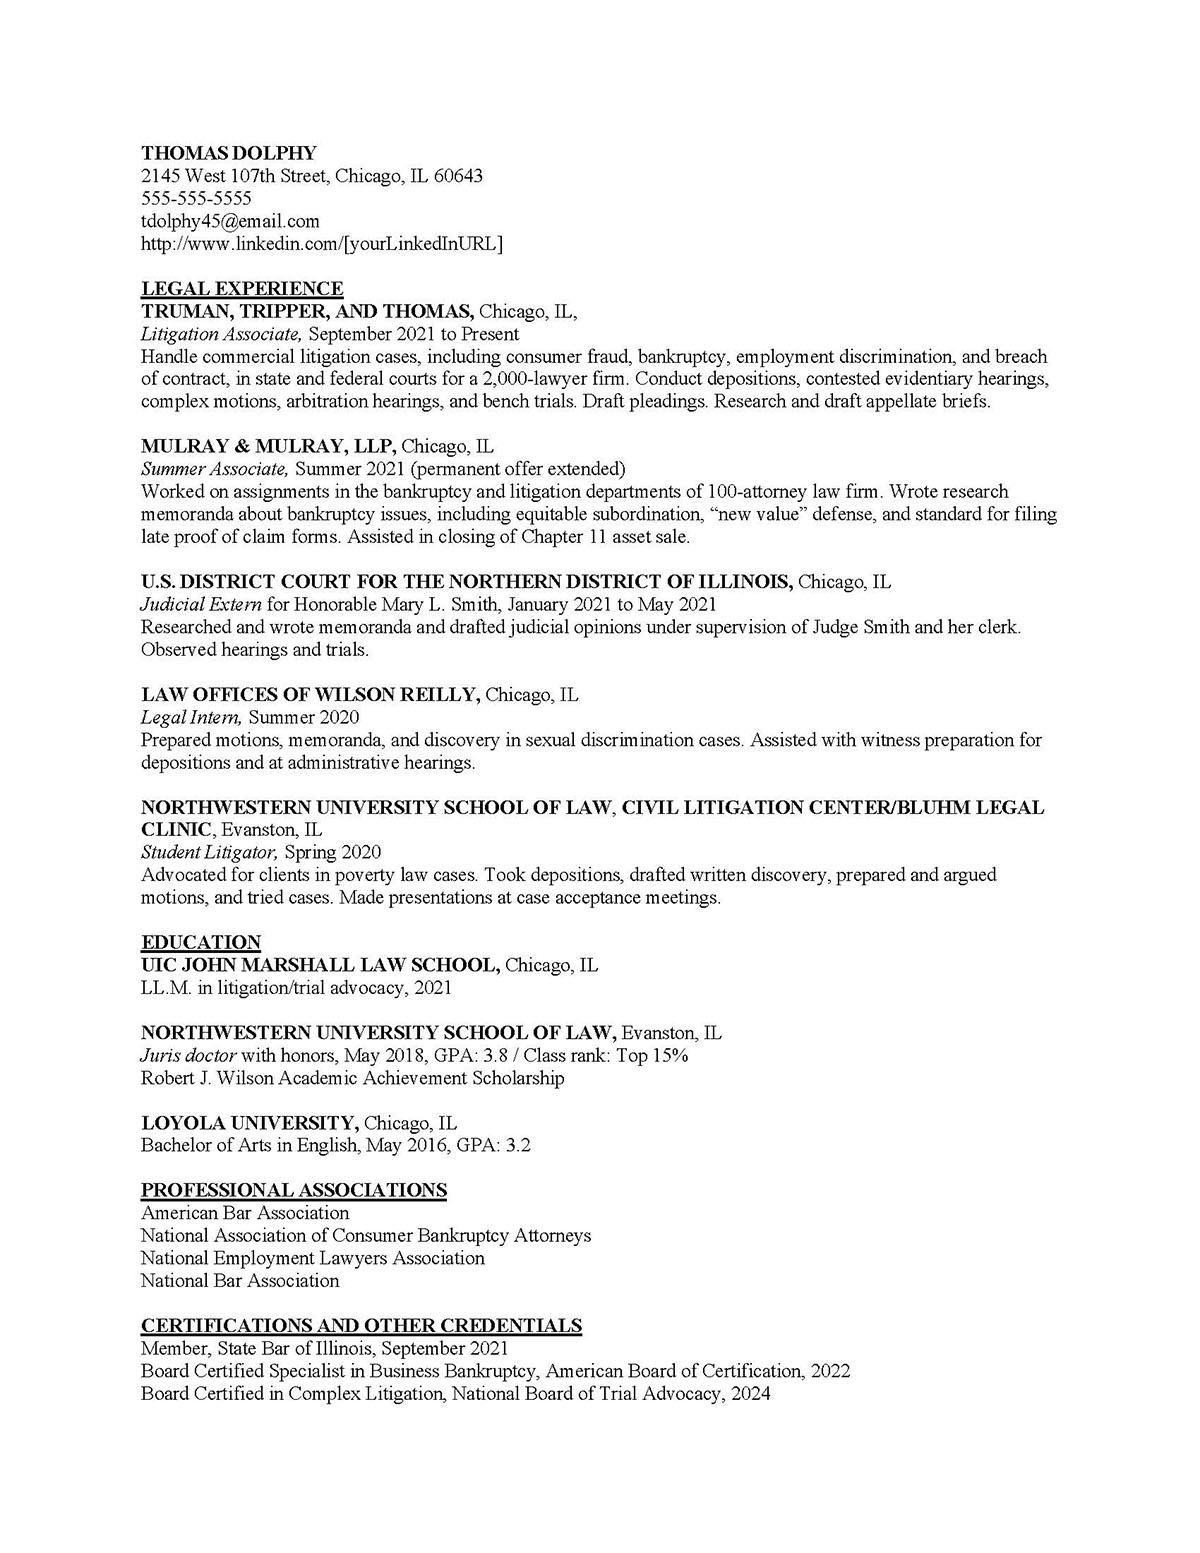 Sample resume: Law, Low Experience, Chronological